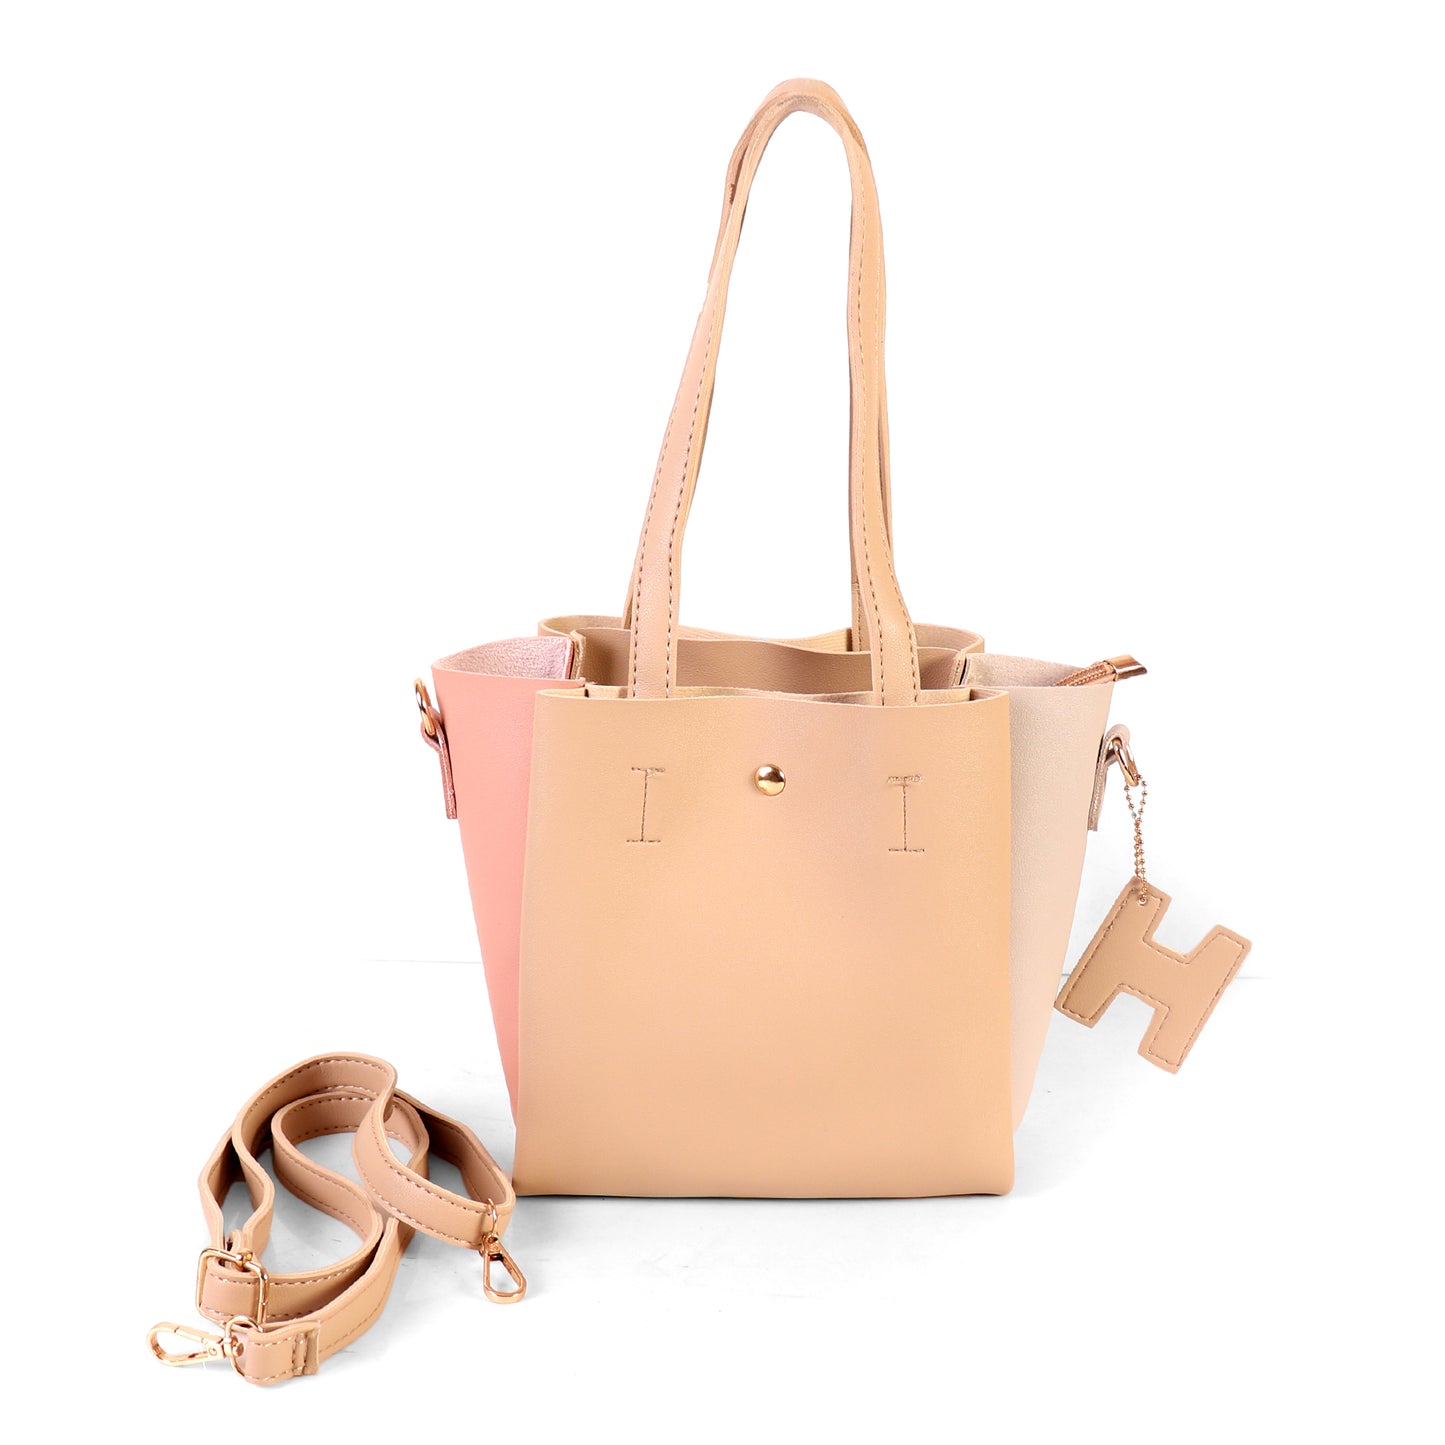 Tote Bag,Nude Nector Hand Bag - Cippele Multi Store